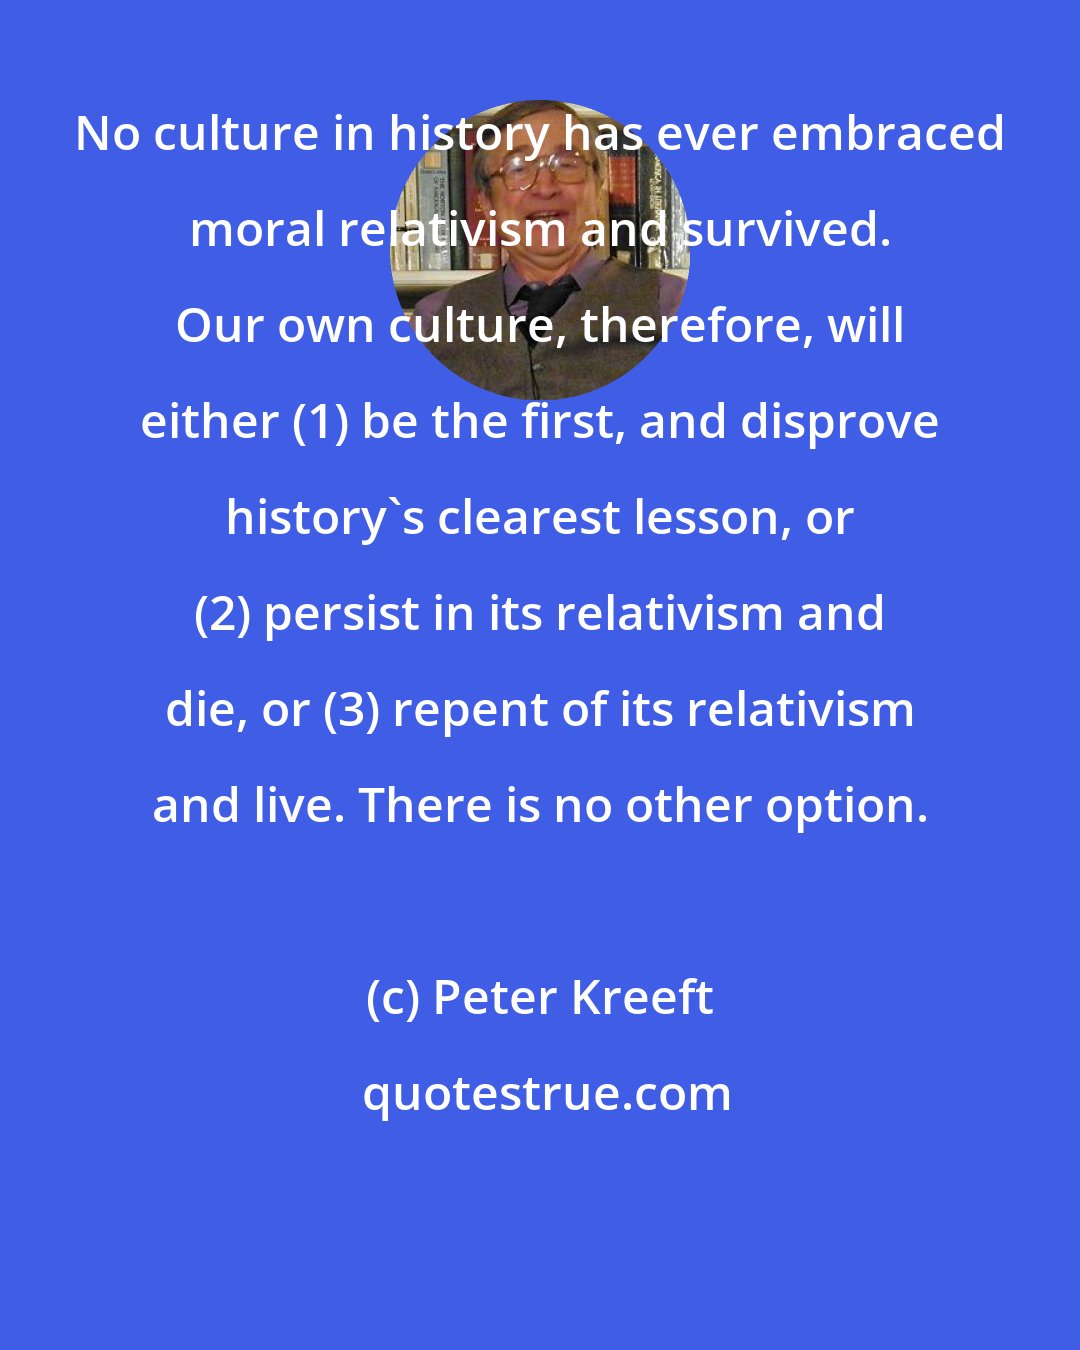 Peter Kreeft: No culture in history has ever embraced moral relativism and survived. Our own culture, therefore, will either (1) be the first, and disprove history's clearest lesson, or (2) persist in its relativism and die, or (3) repent of its relativism and live. There is no other option.